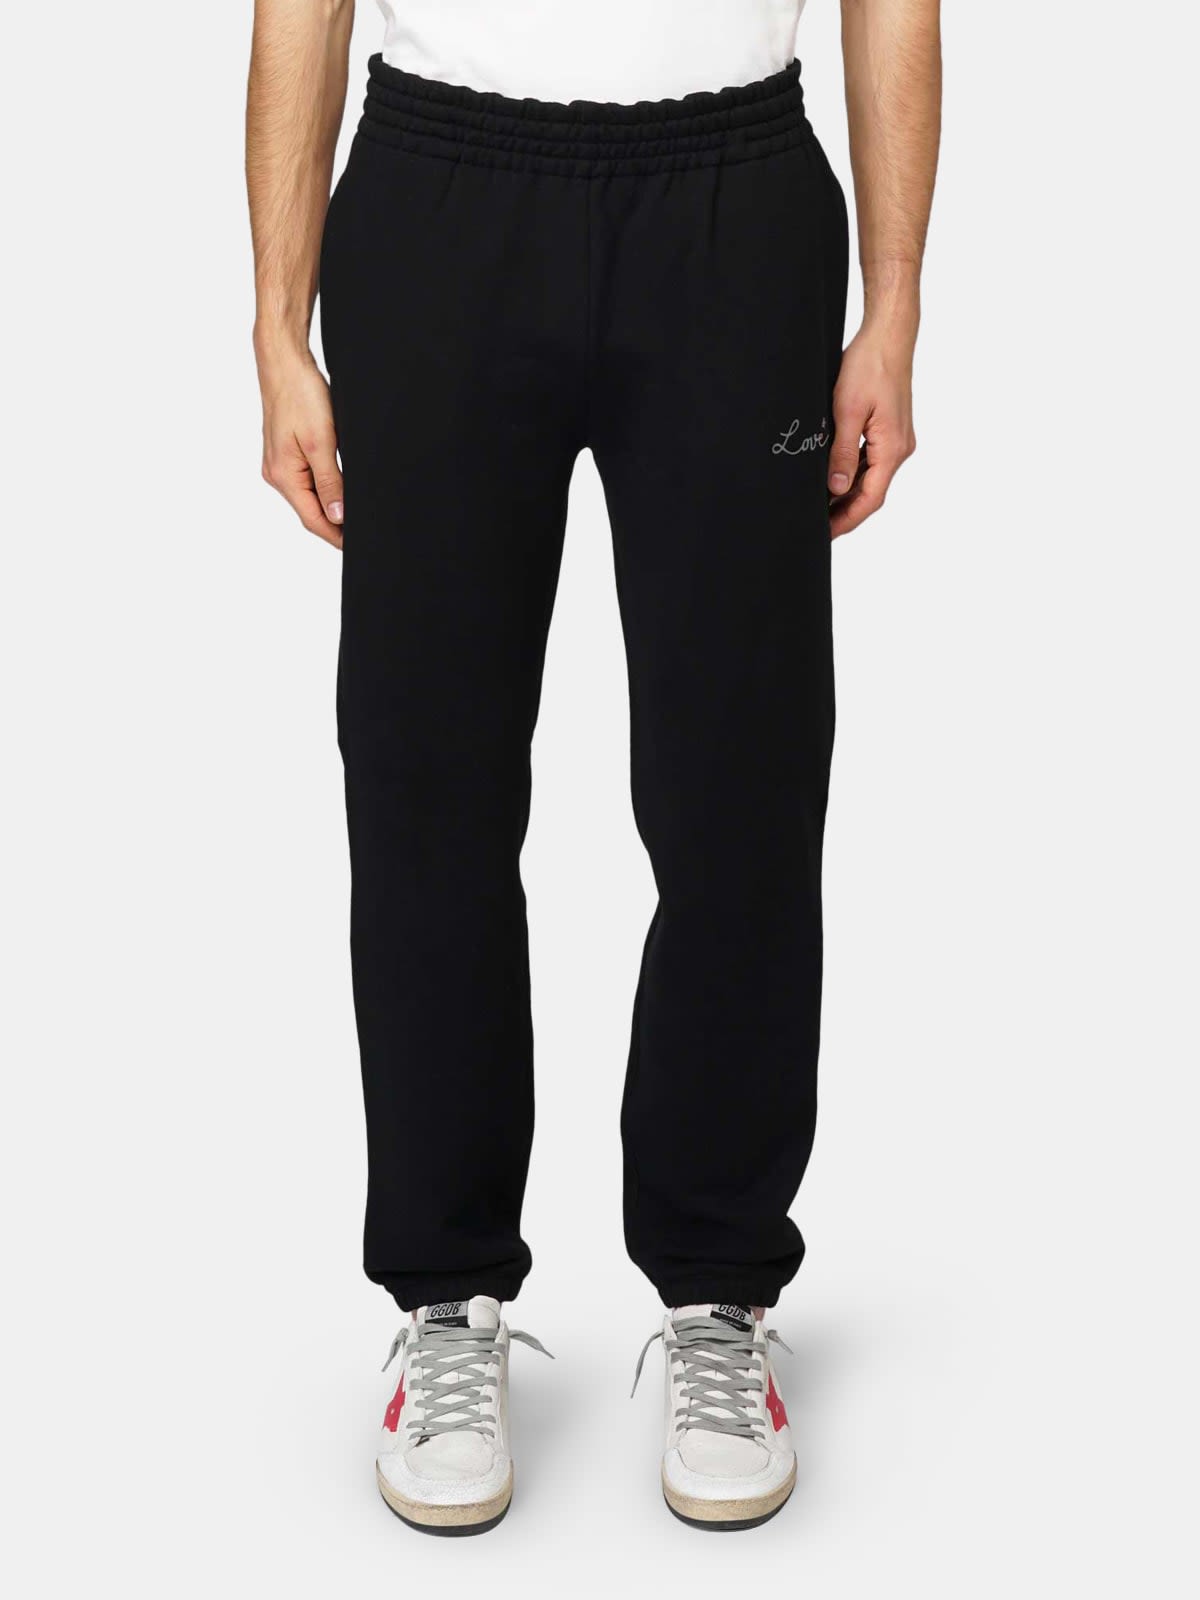 Black Hamm joggers with Love embroidery